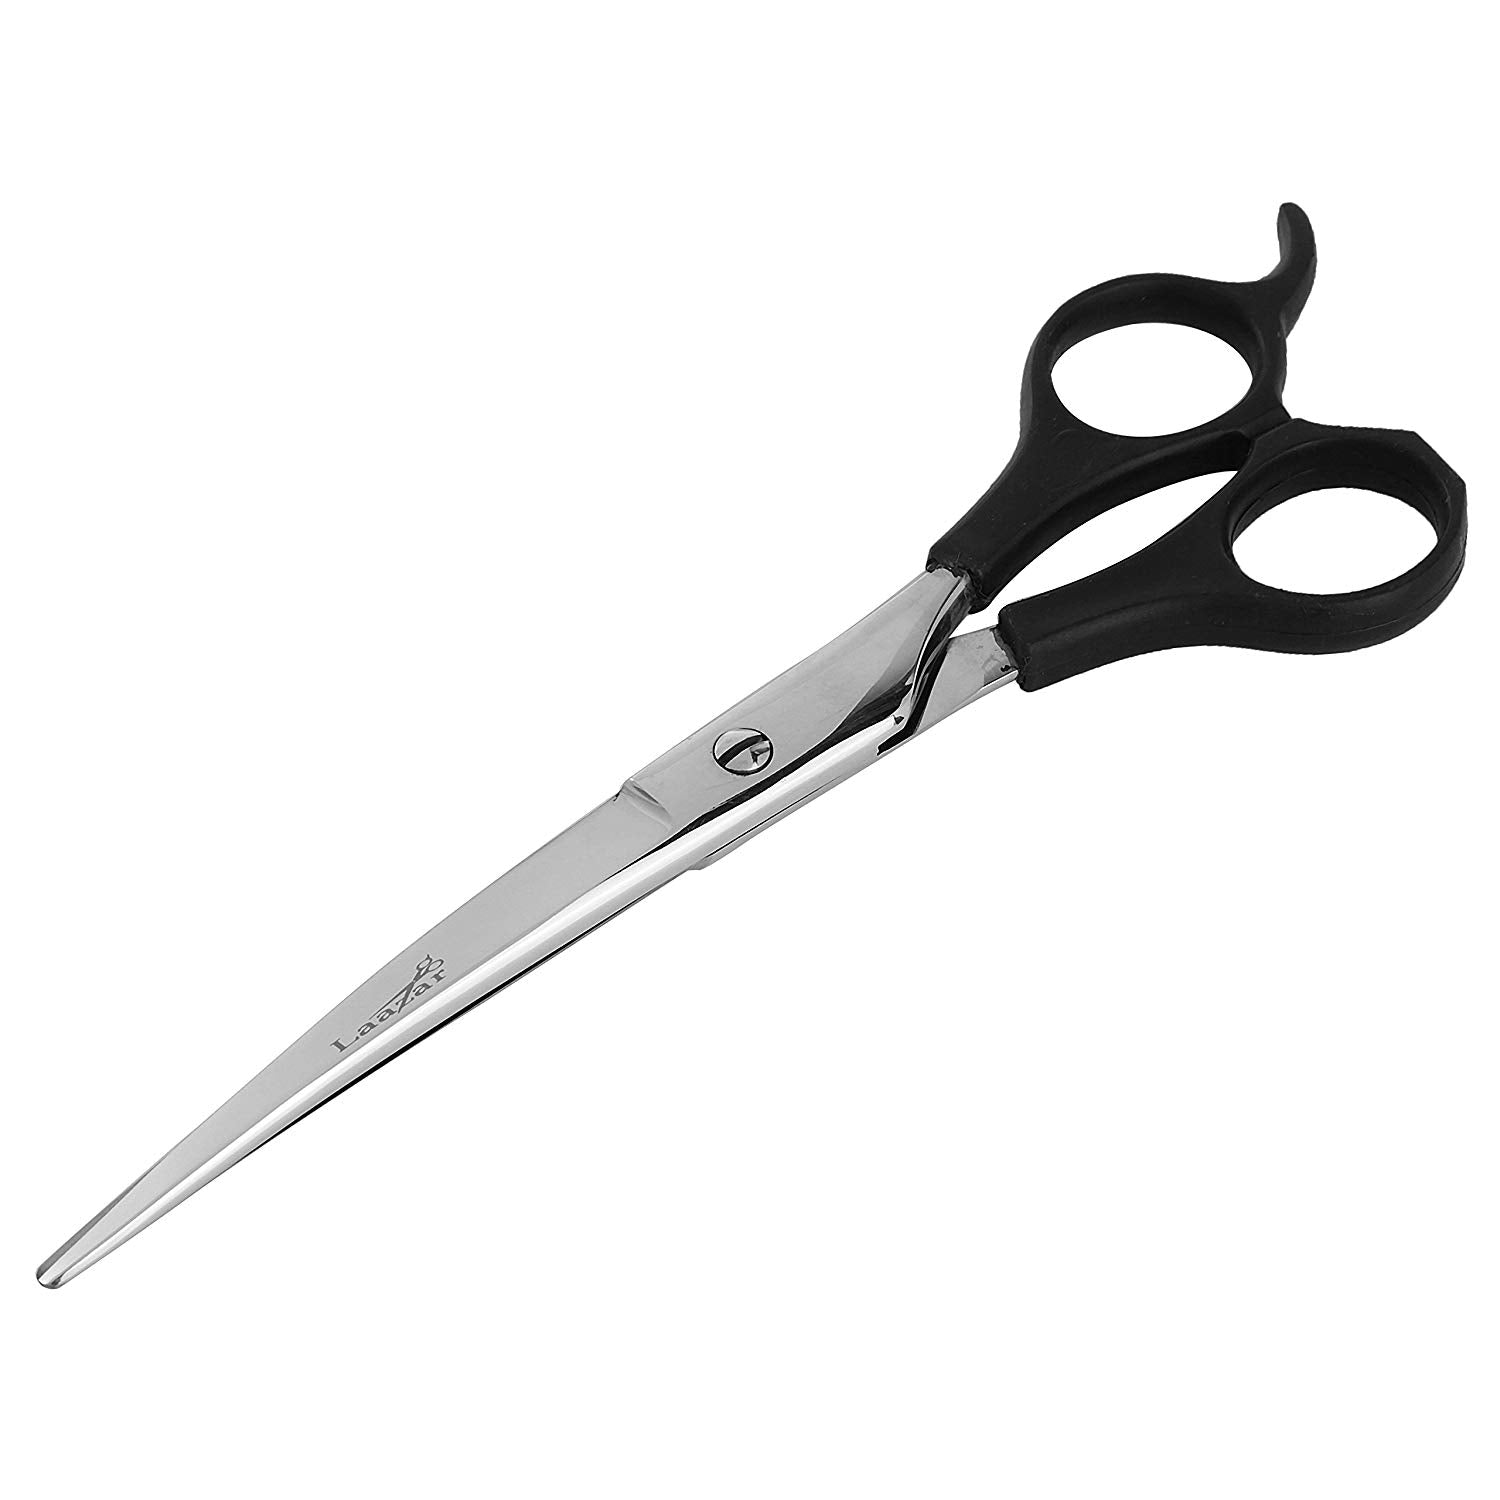 Professional Pet Beauty Scissors Slotted Large Screw Imported Vg10 Material  7.5 Comprehensive Direct Shear Master Scissors